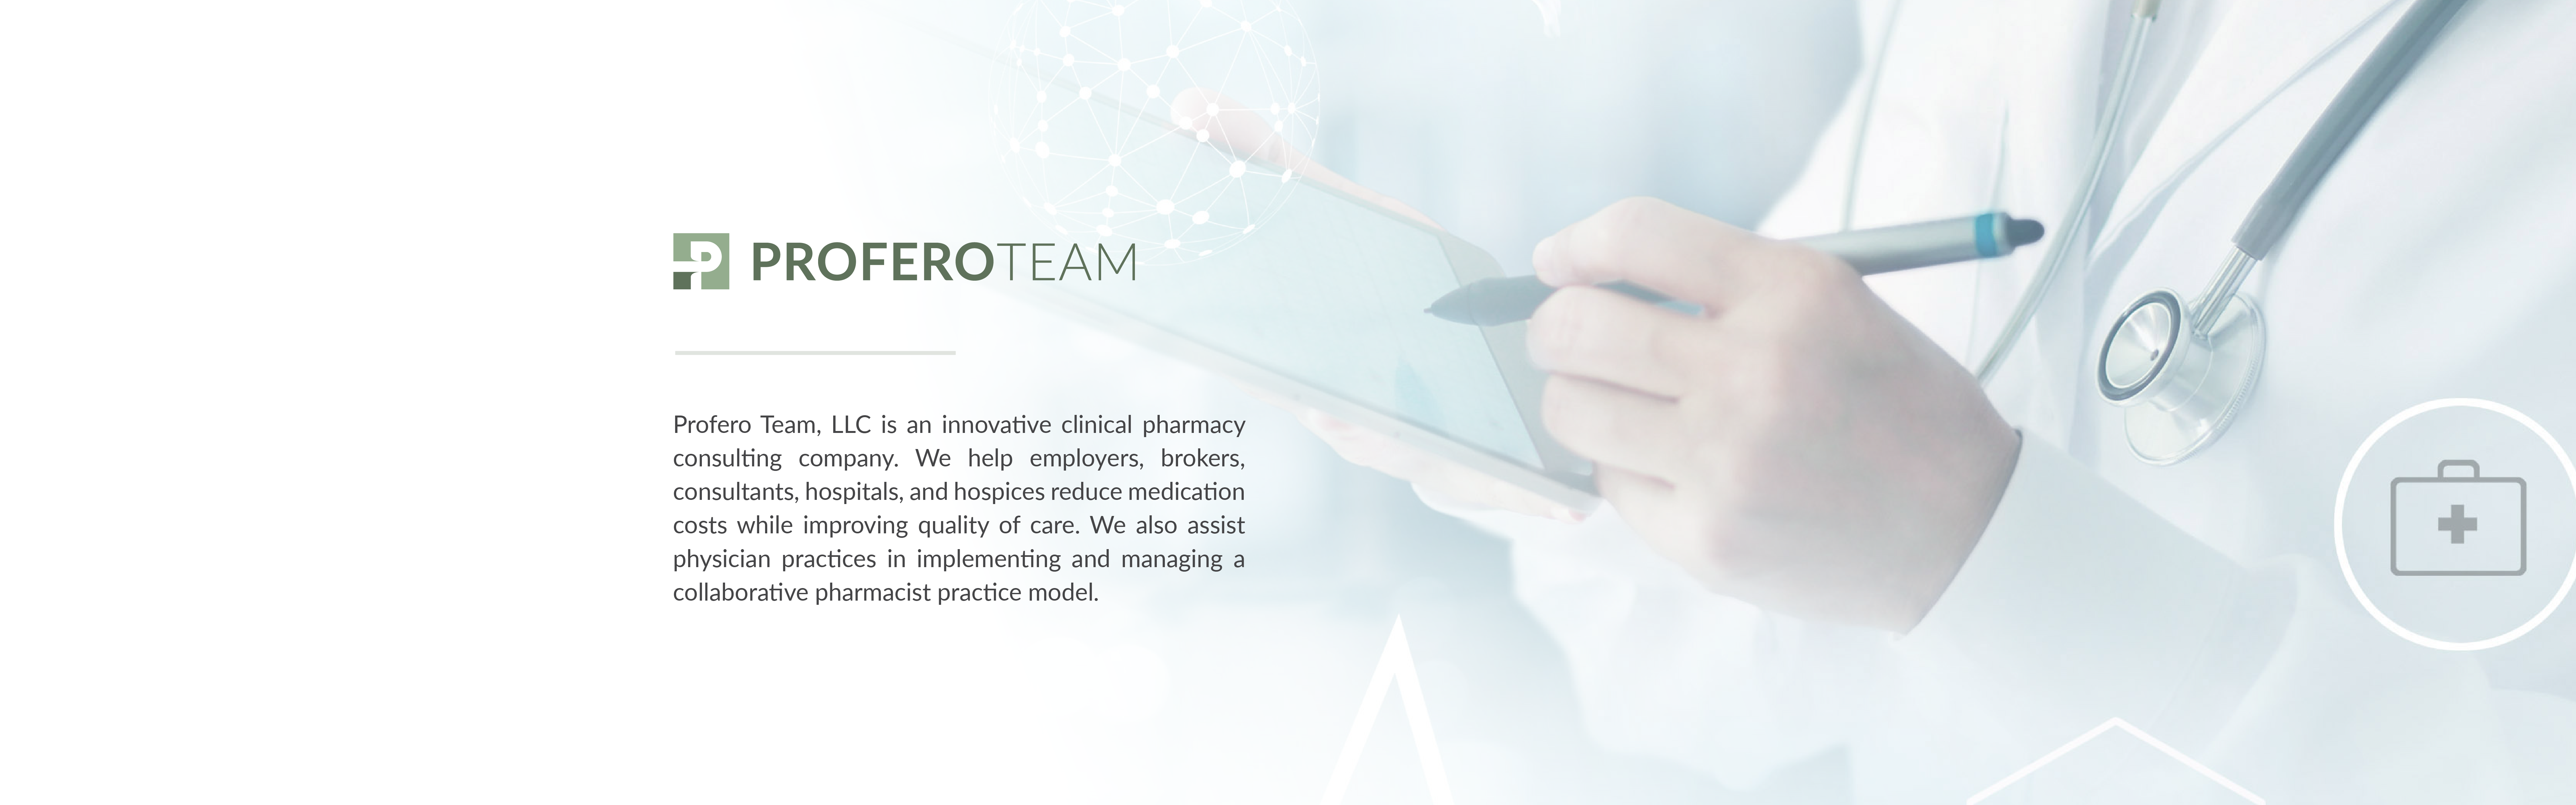 A healthcare professional in a lab coat is using a digital tablet, with a graphic overlay of the text "Profero Team" and a brief description of the company's services in clinical pharmacy consulting.